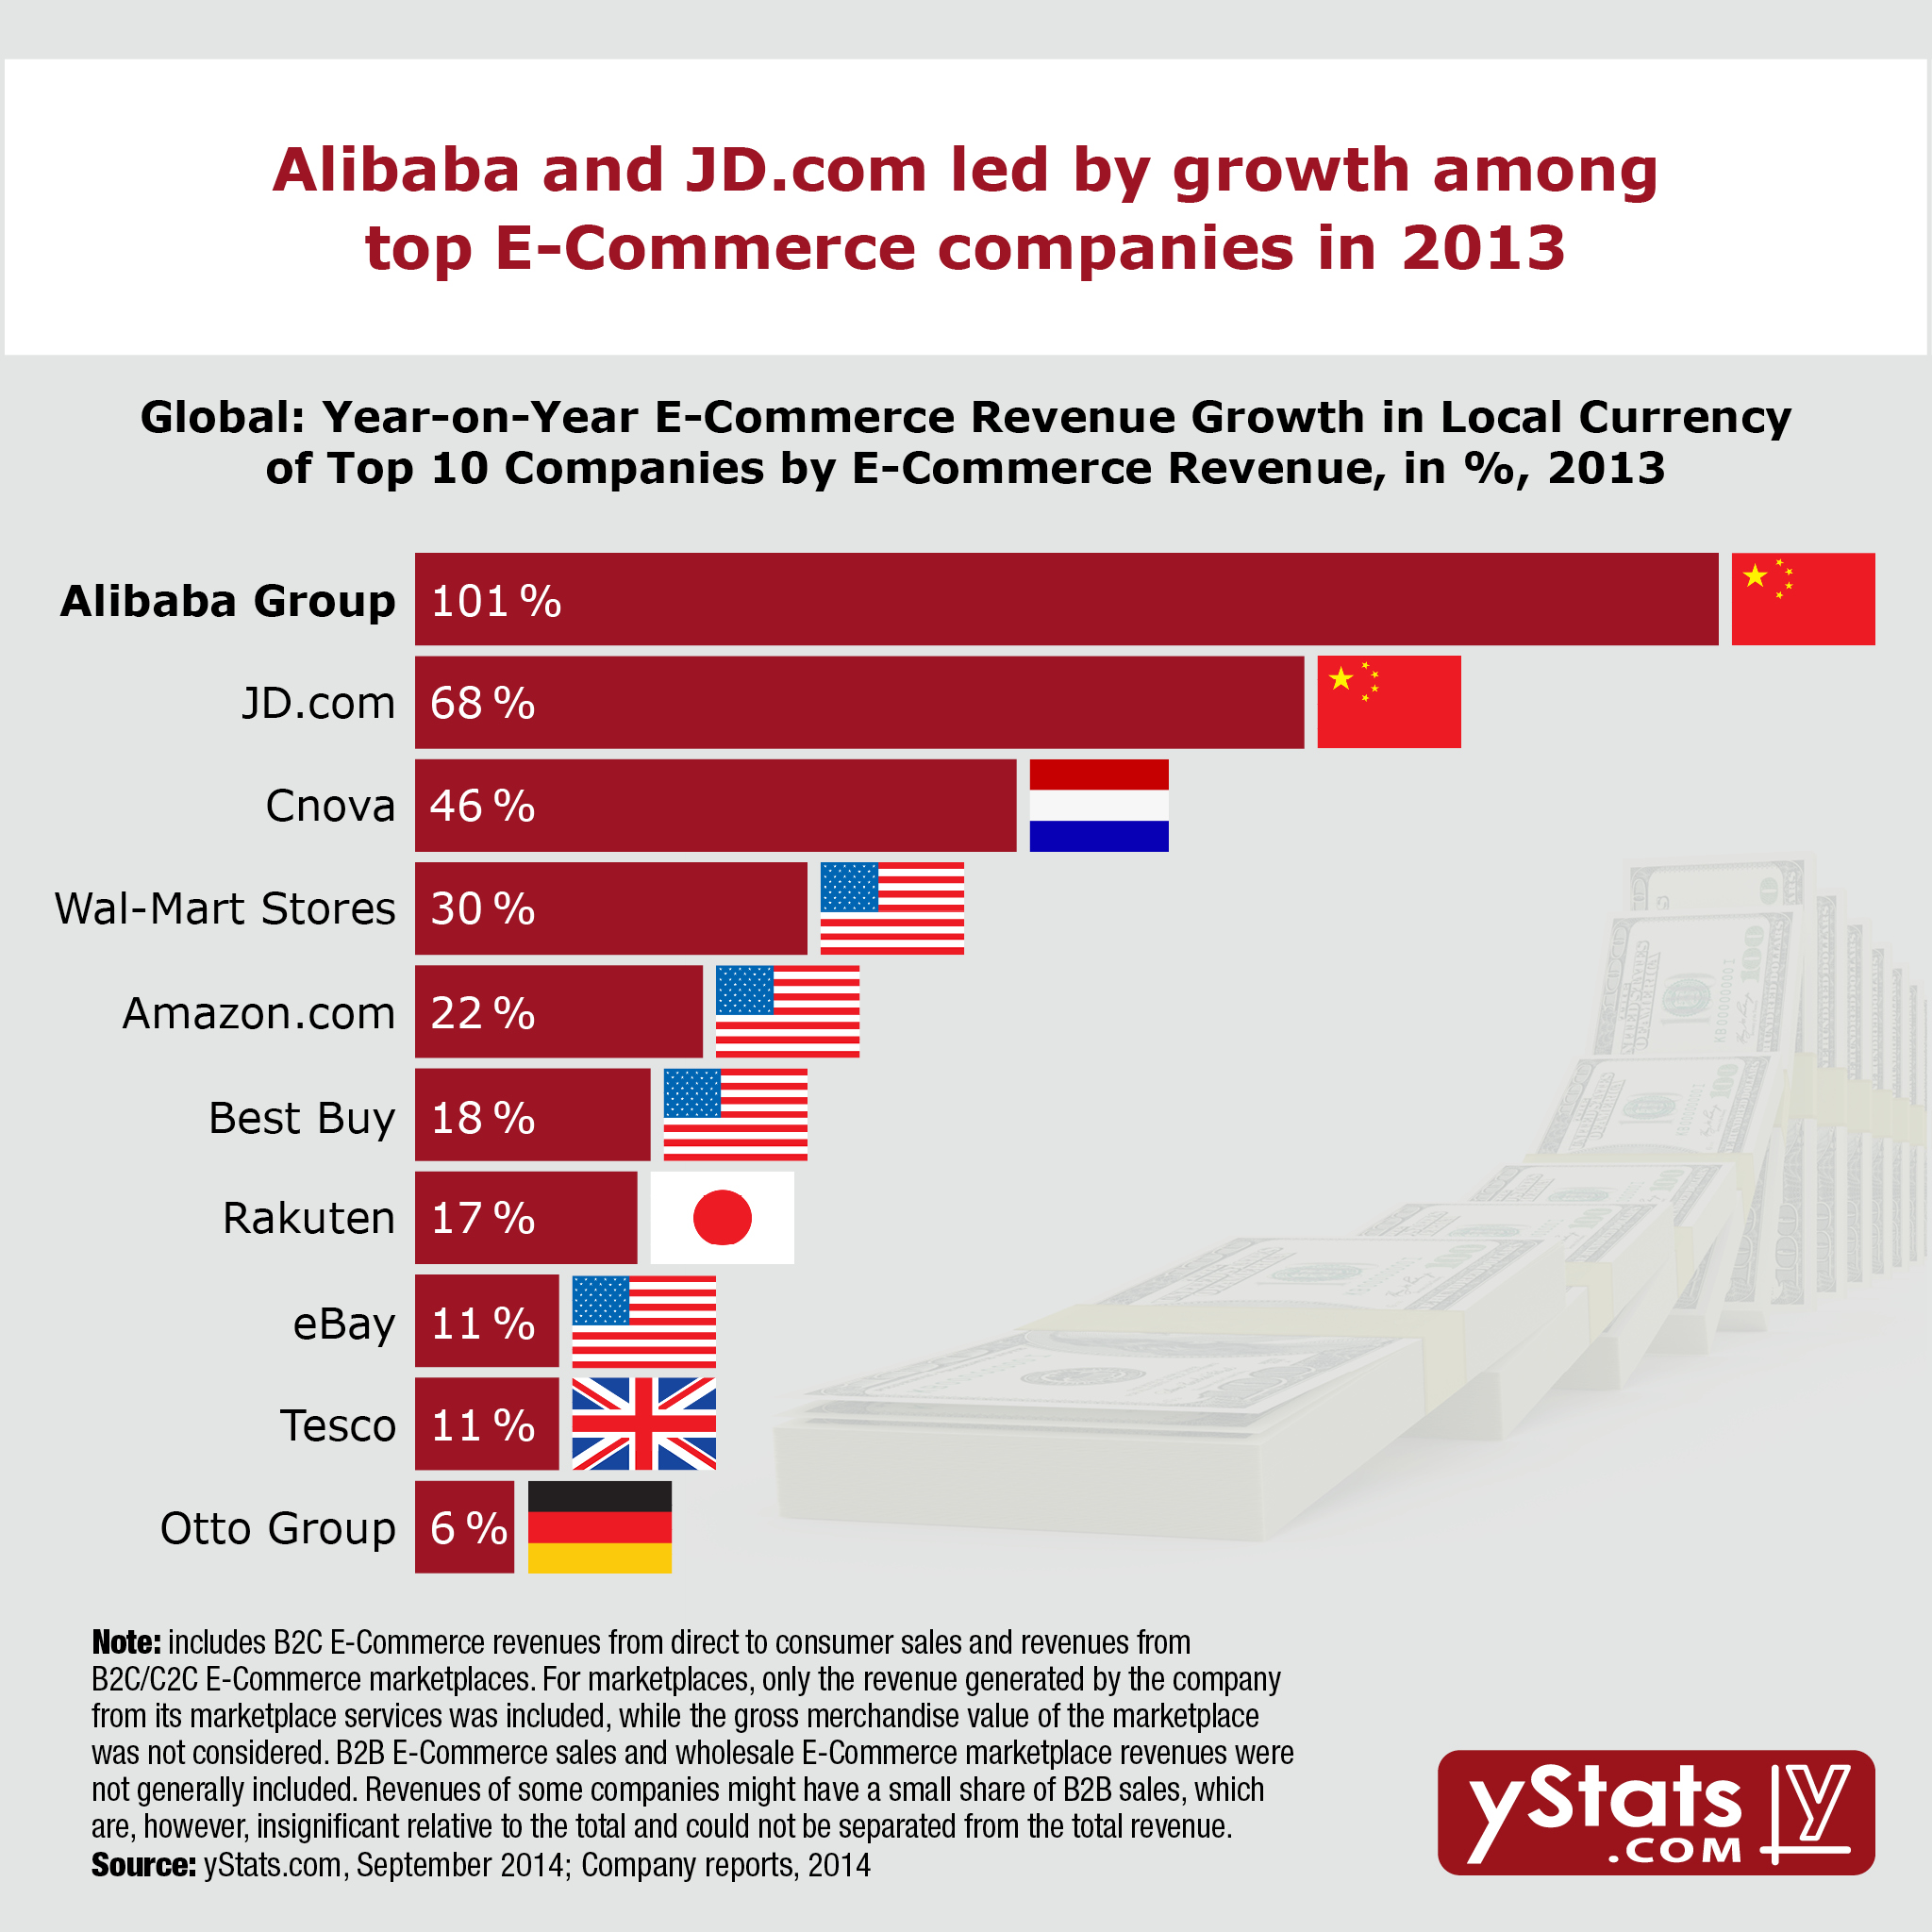 yStats.com Infographic The World’s Leading E-Commerce Companies 2014 2